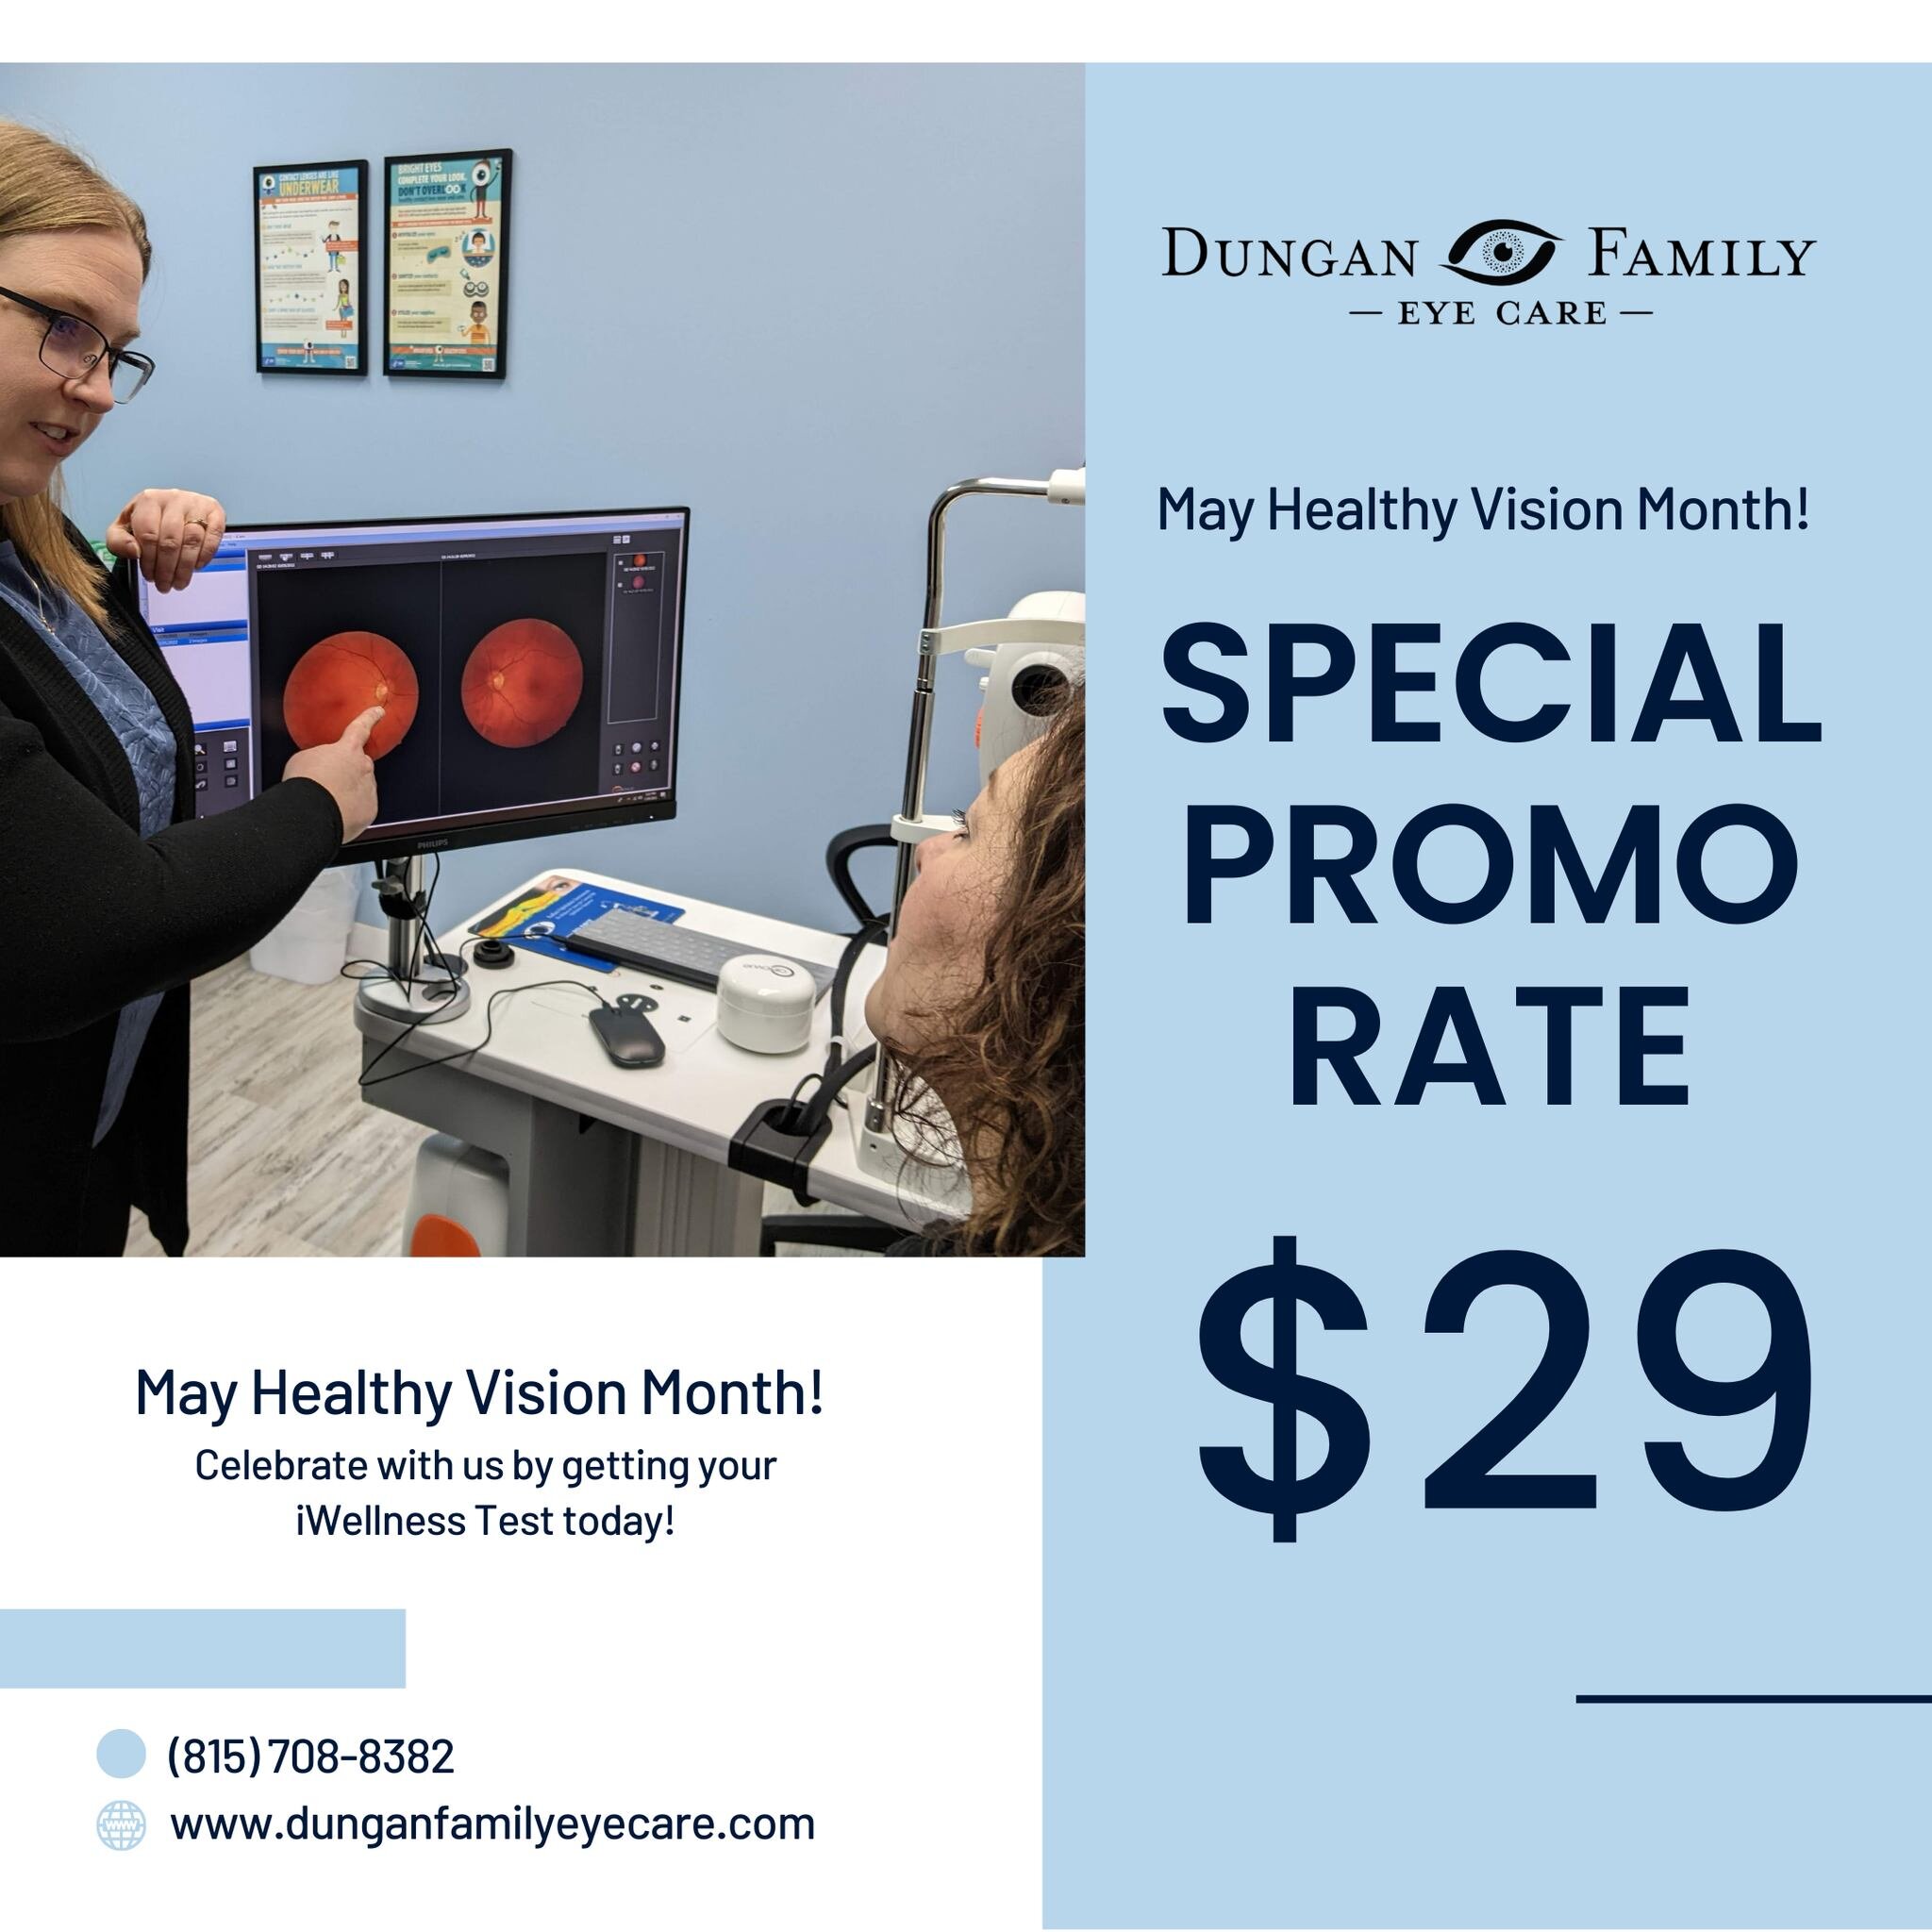 🌟 May is #HealthyVisionMonth! It&rsquo;s our tightly held value that everyone deserves healthy eyes.

To celebrate, we're offering our iWellness testing for just $29 through the month of May! Don't miss this chance to safeguard your priceless eyesig